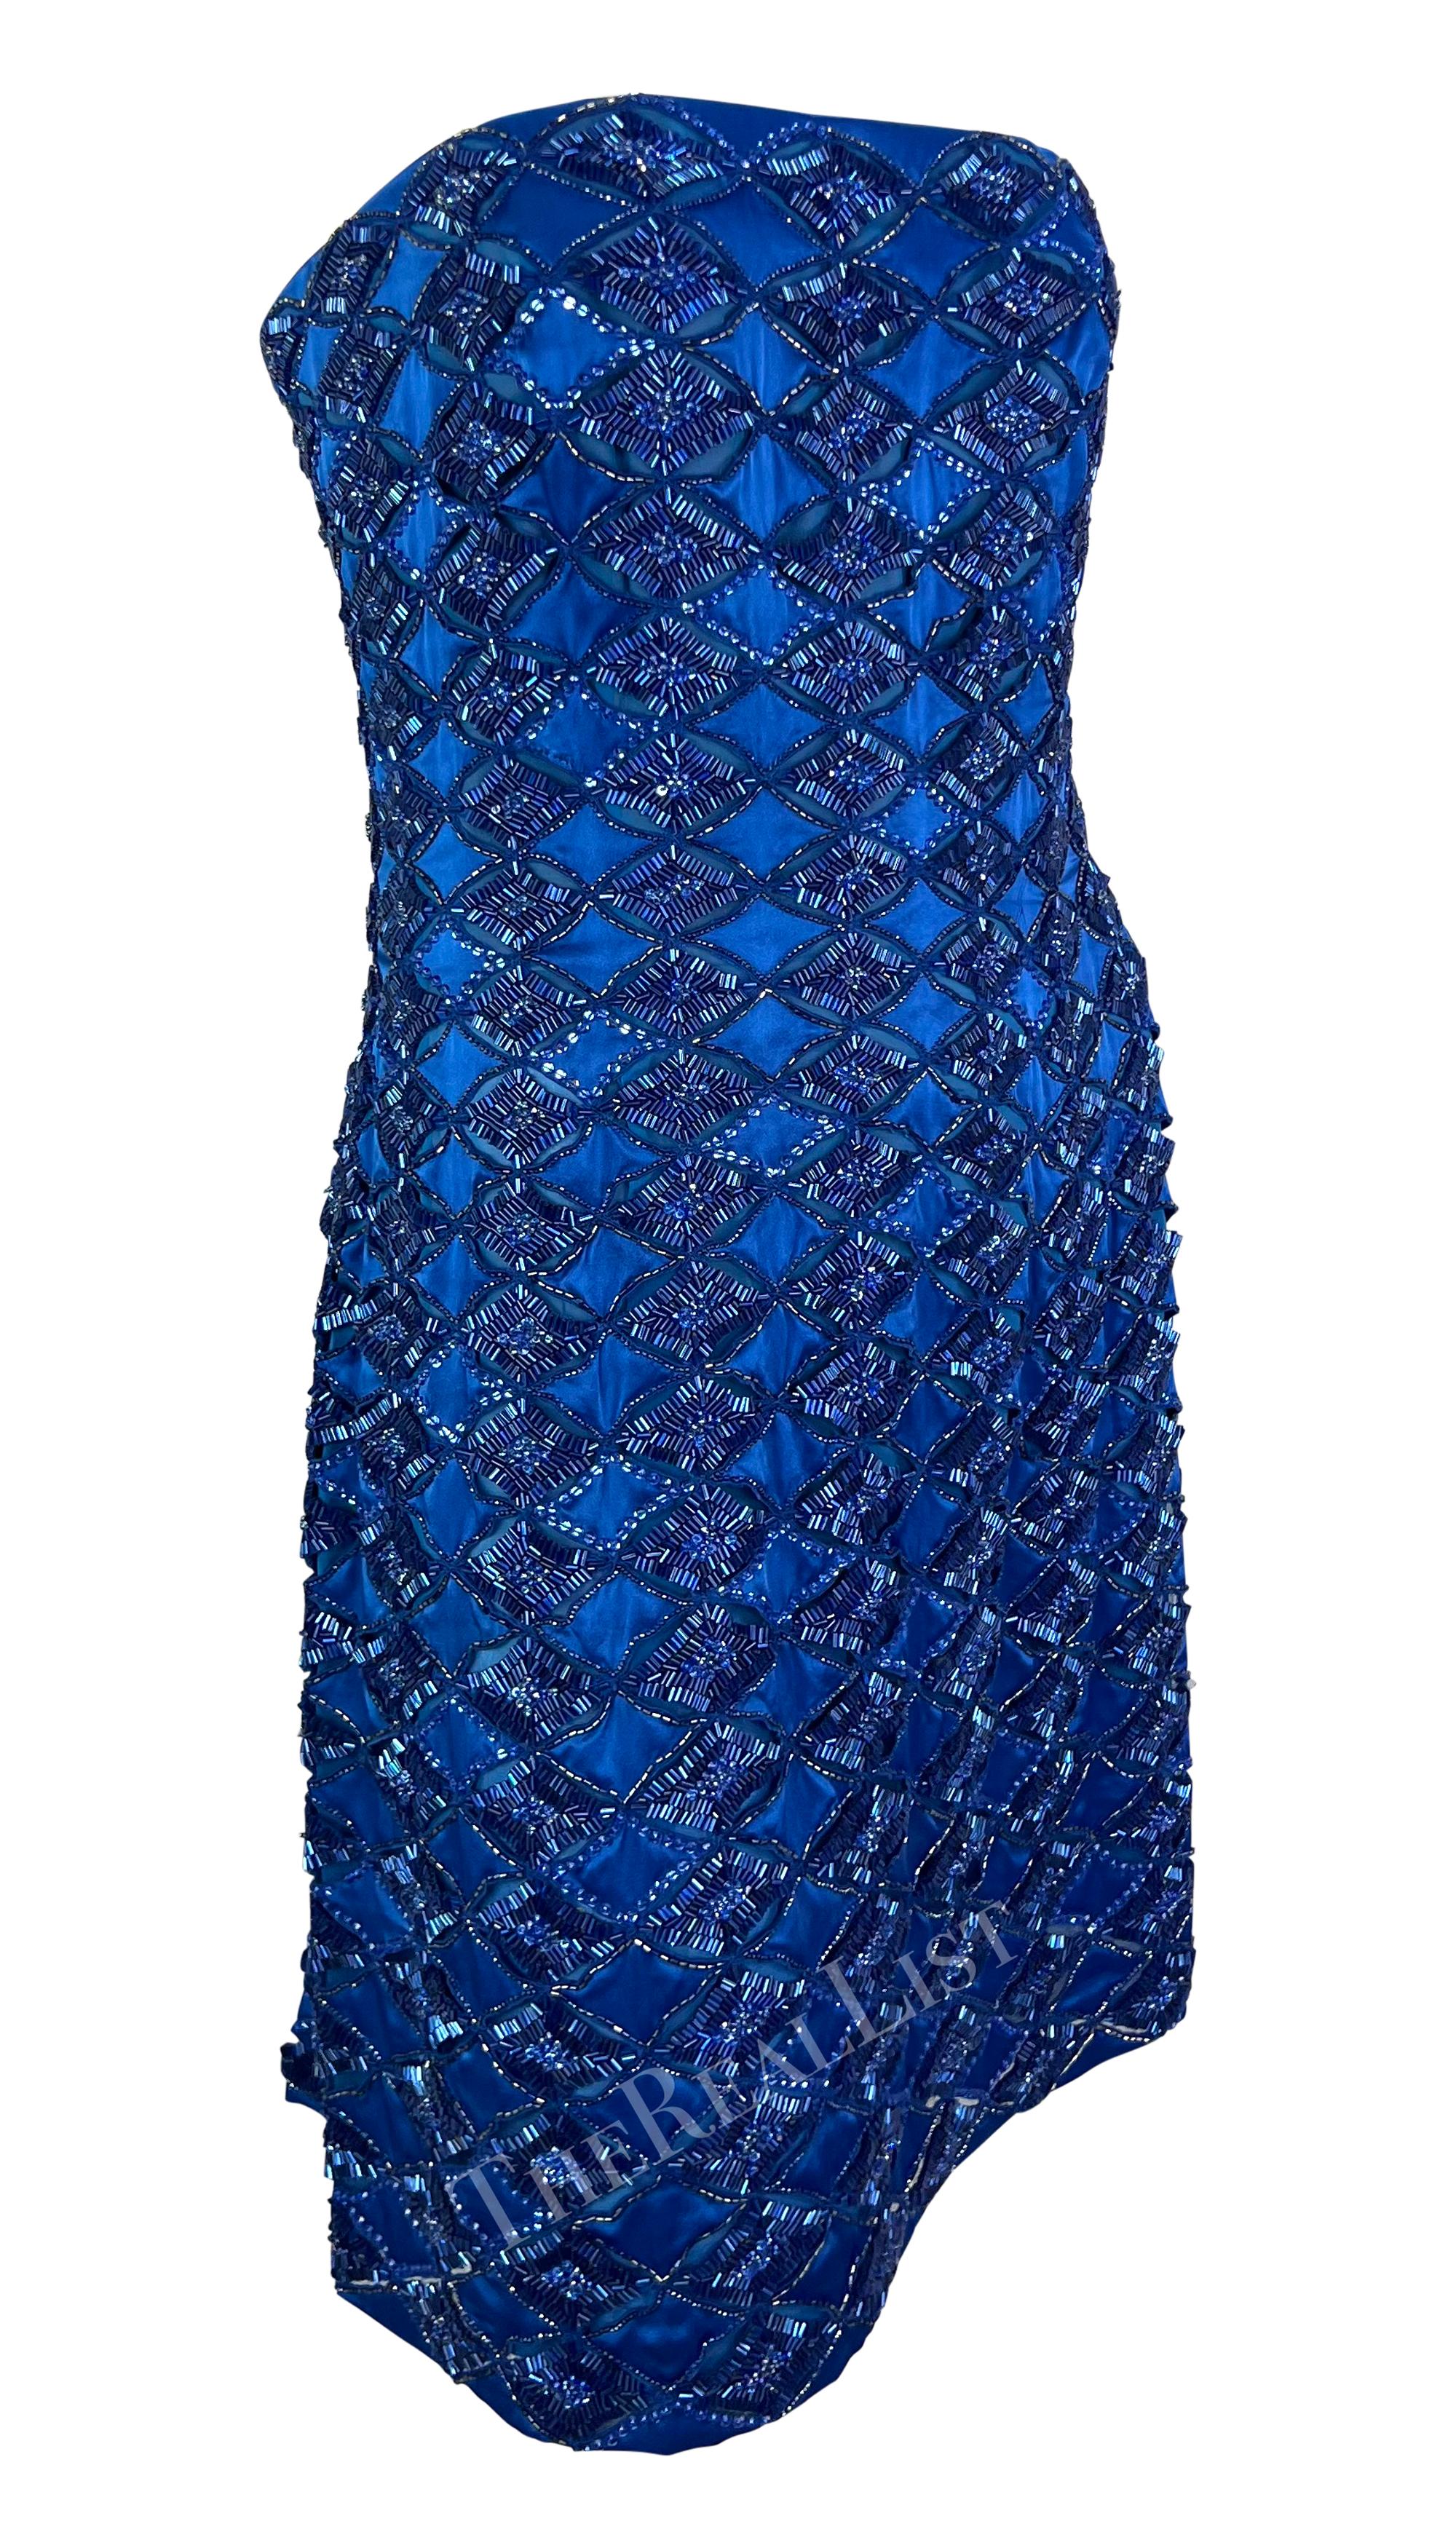 S/S 2001 Atelier Versace by Donatella Runway Blue Beaded Strapless Mini Dress For Sale 6